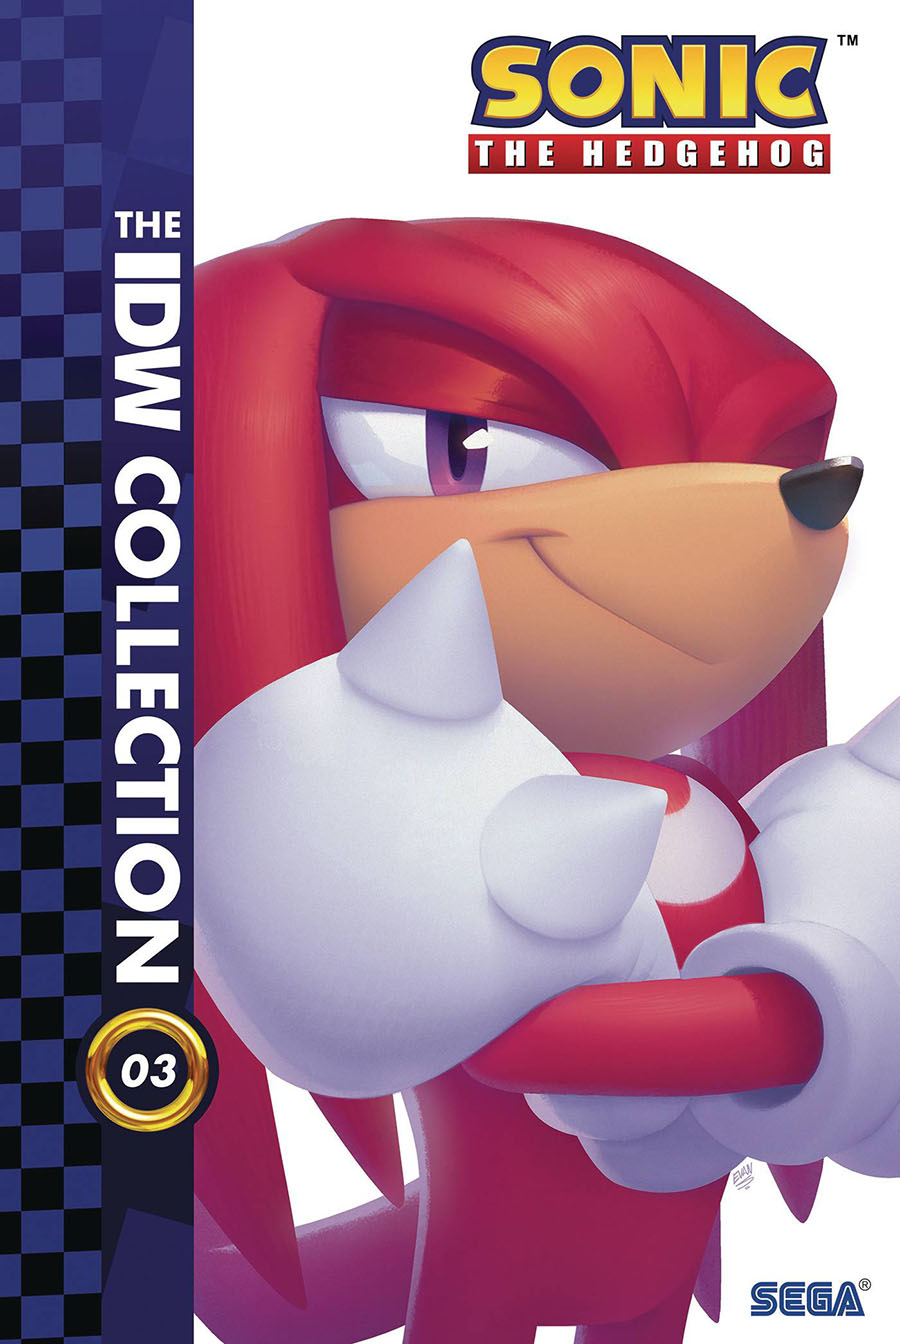 Sonic The Hedgehog IDW Collection Vol 3 HC